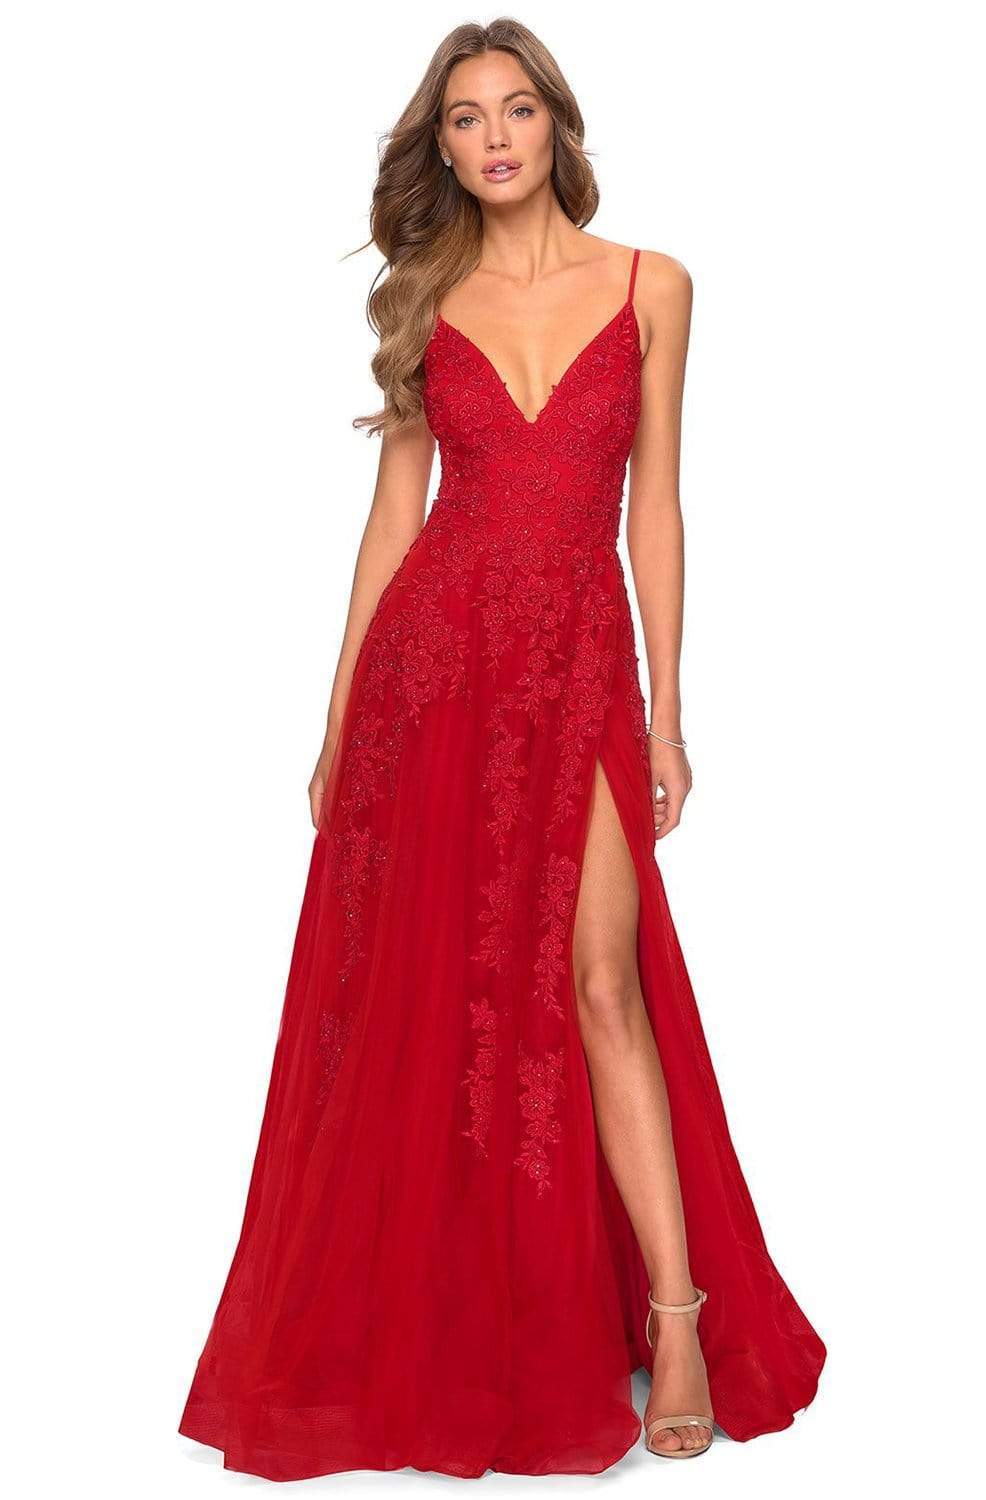 La Femme - 28985 Floral Lace Embroidered Deep V-neck A-line Gown Prom Dresses 00 / Red